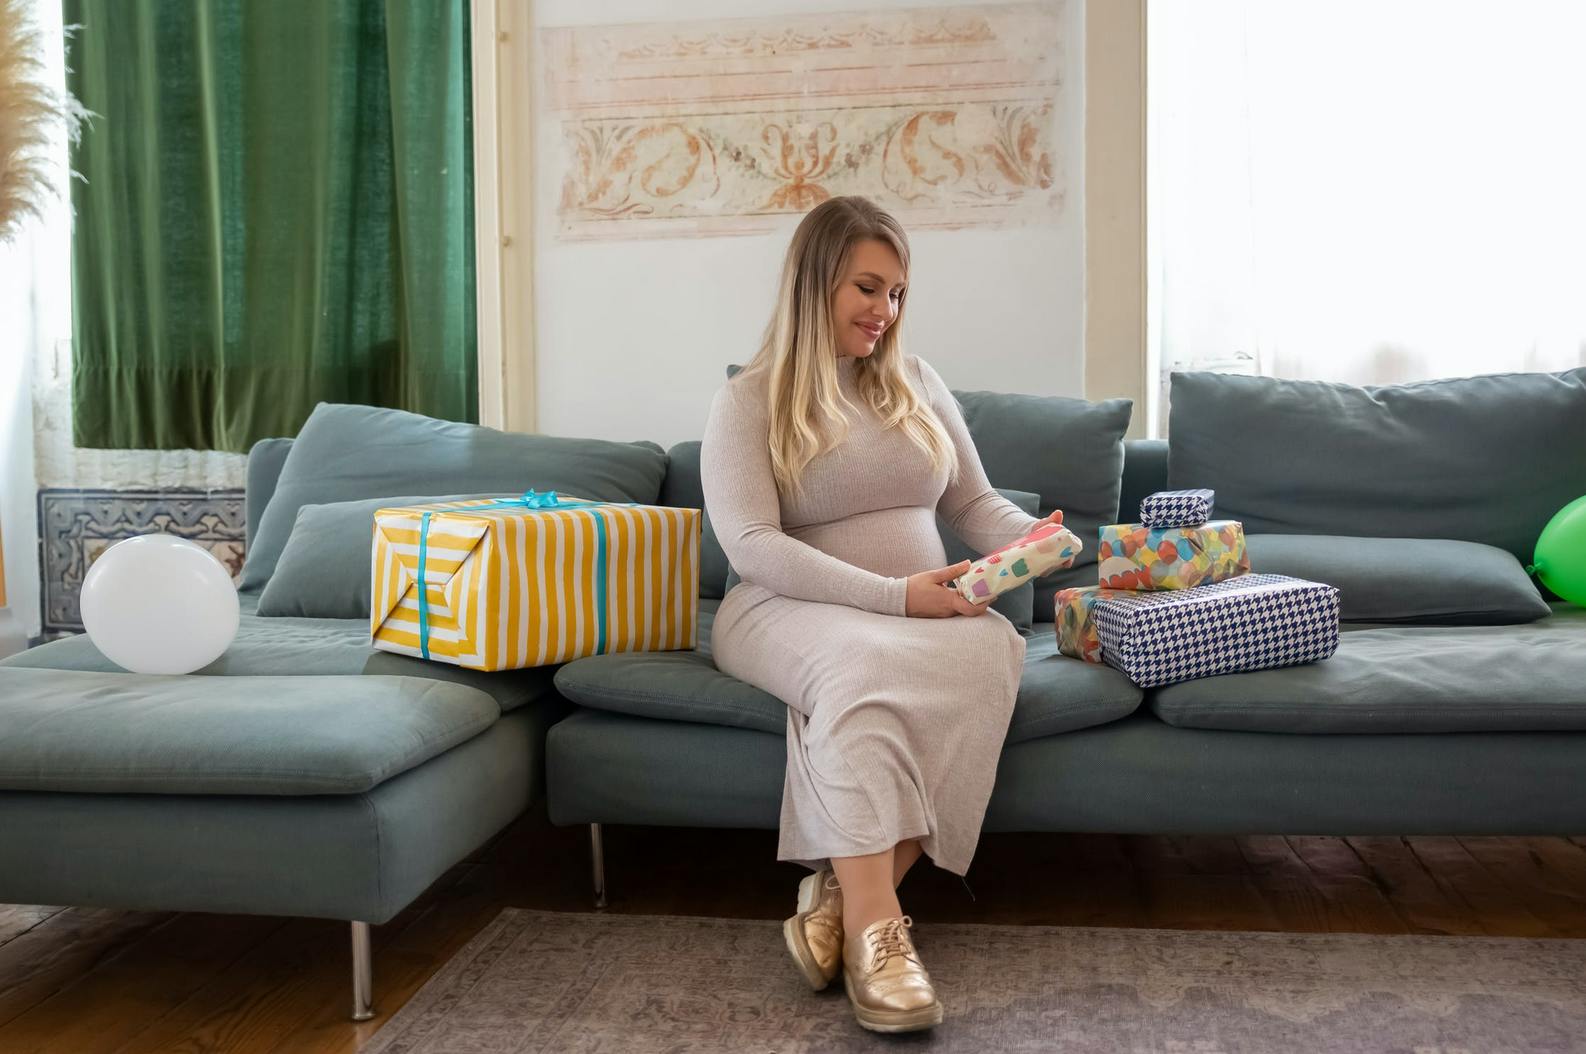 pregnant woman on green couch opening gifts